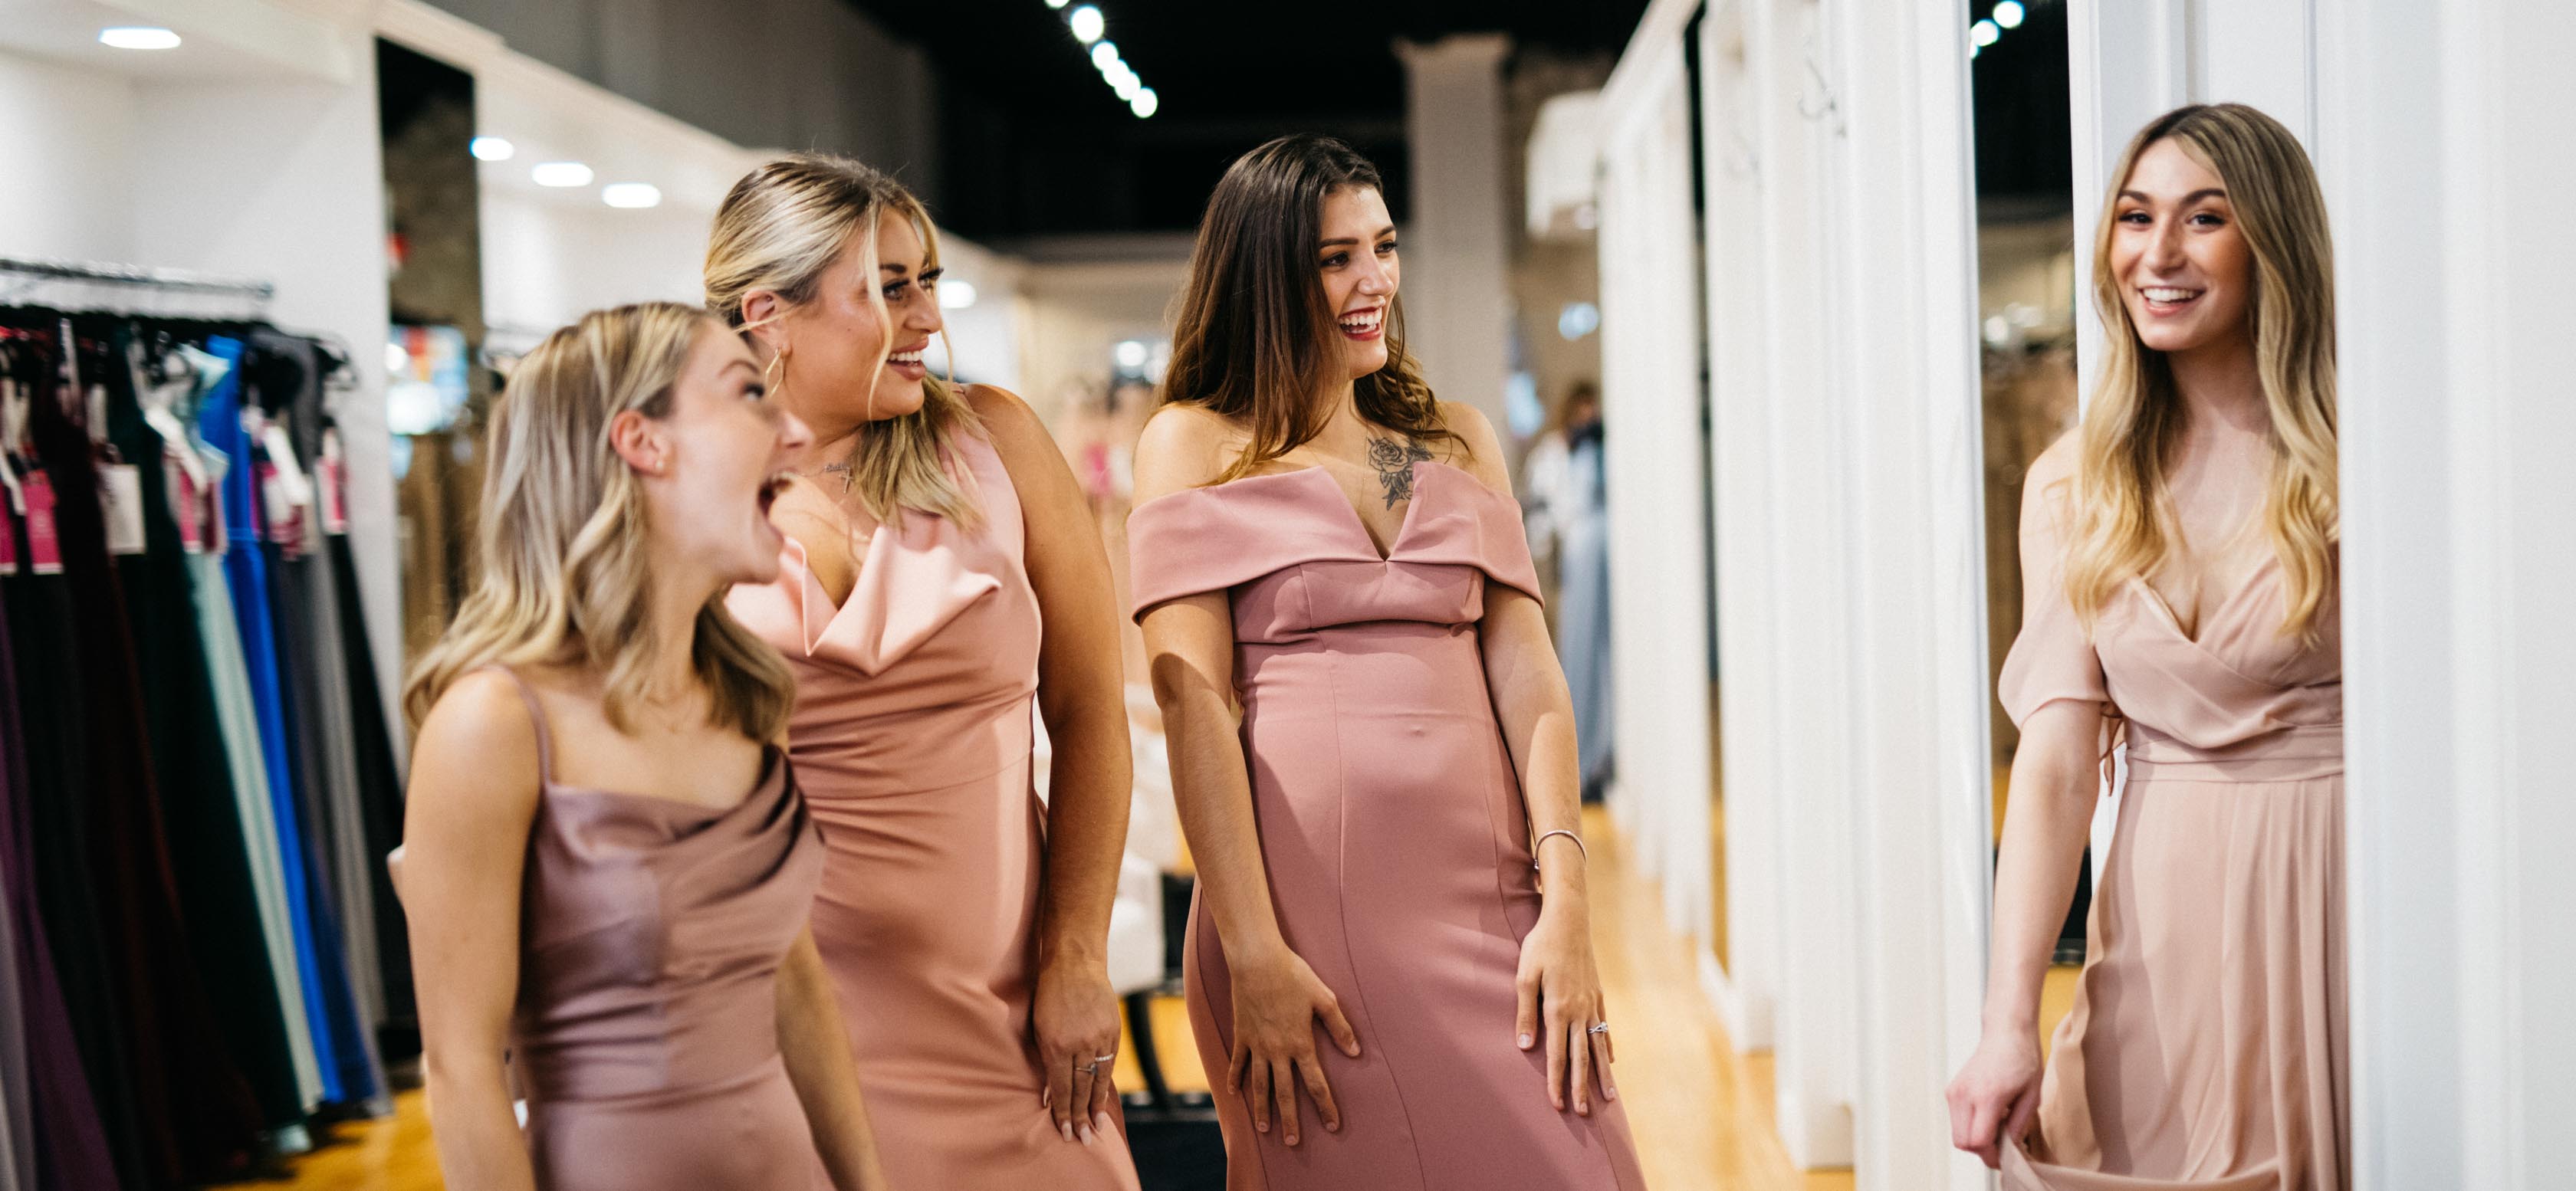 Bridesmaids trying on dresses.